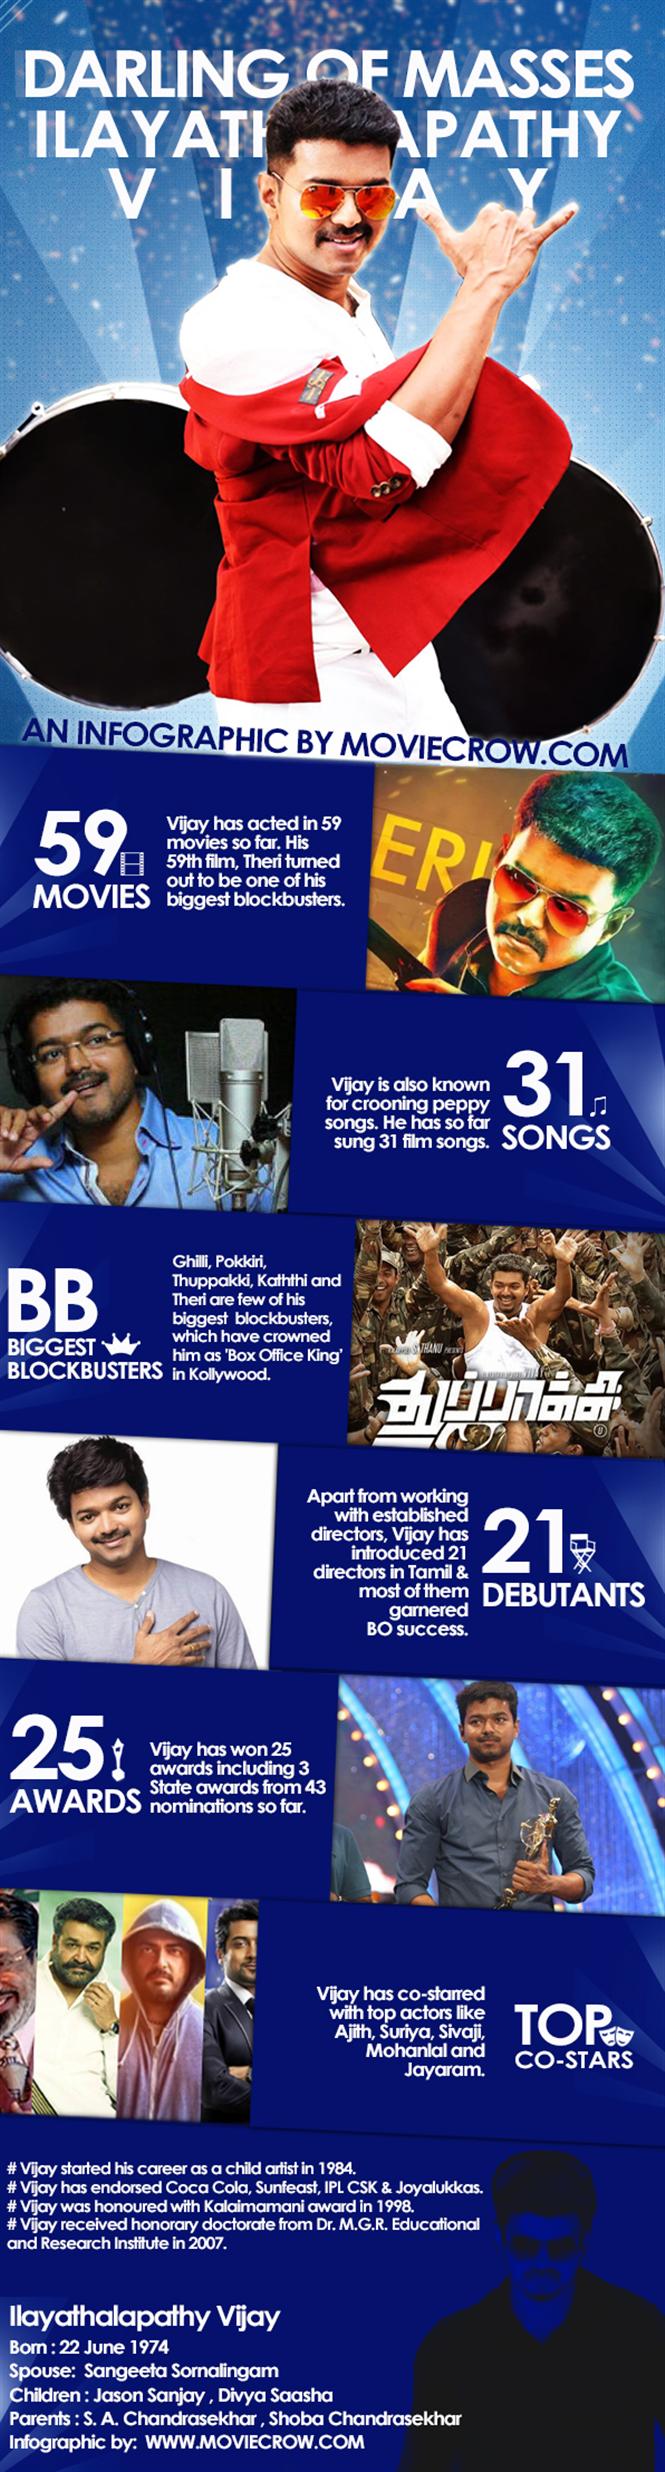 Vijay's birthday special - Infographic on the Darling of Masses